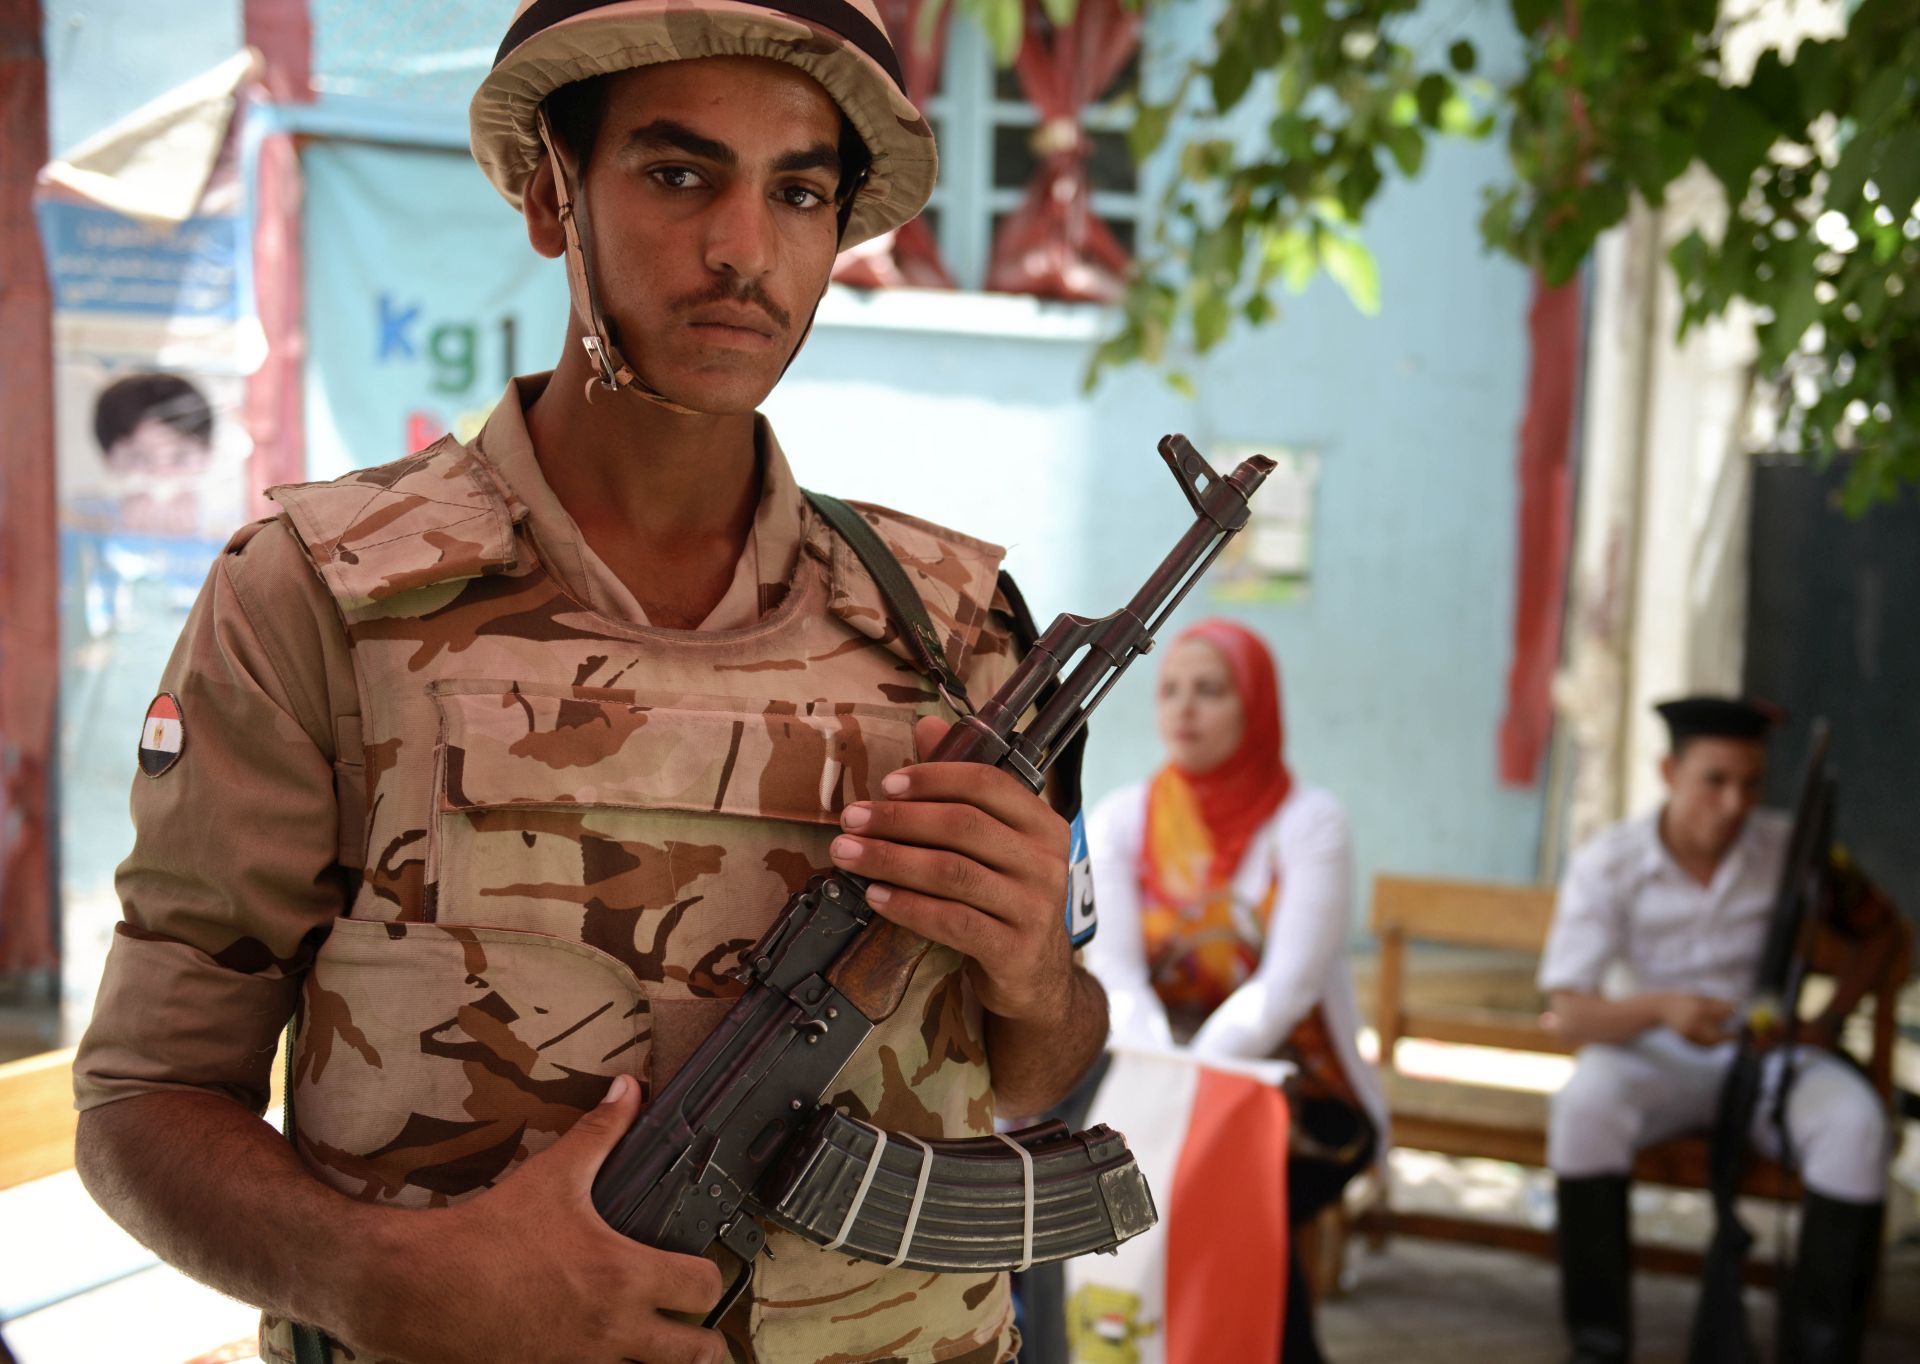 CAIRO, EGYPT - MAY 26:  An Egyptian military conscript stands outside a polling station in the Garden City suburb of Cairo on the first day of presidential elections on May 26, 2014 in Cairo, Egypt. Egypt will hold Presidential elections on 26th and 27th May for the first time since the military deposed President Morsi. There are only two candidates standing, Hamdeen Sabahi and Abdel Fattah al-Sisi with al- Sisi expected to win the election (Photo by Jonathan Rashad/Getty Images)